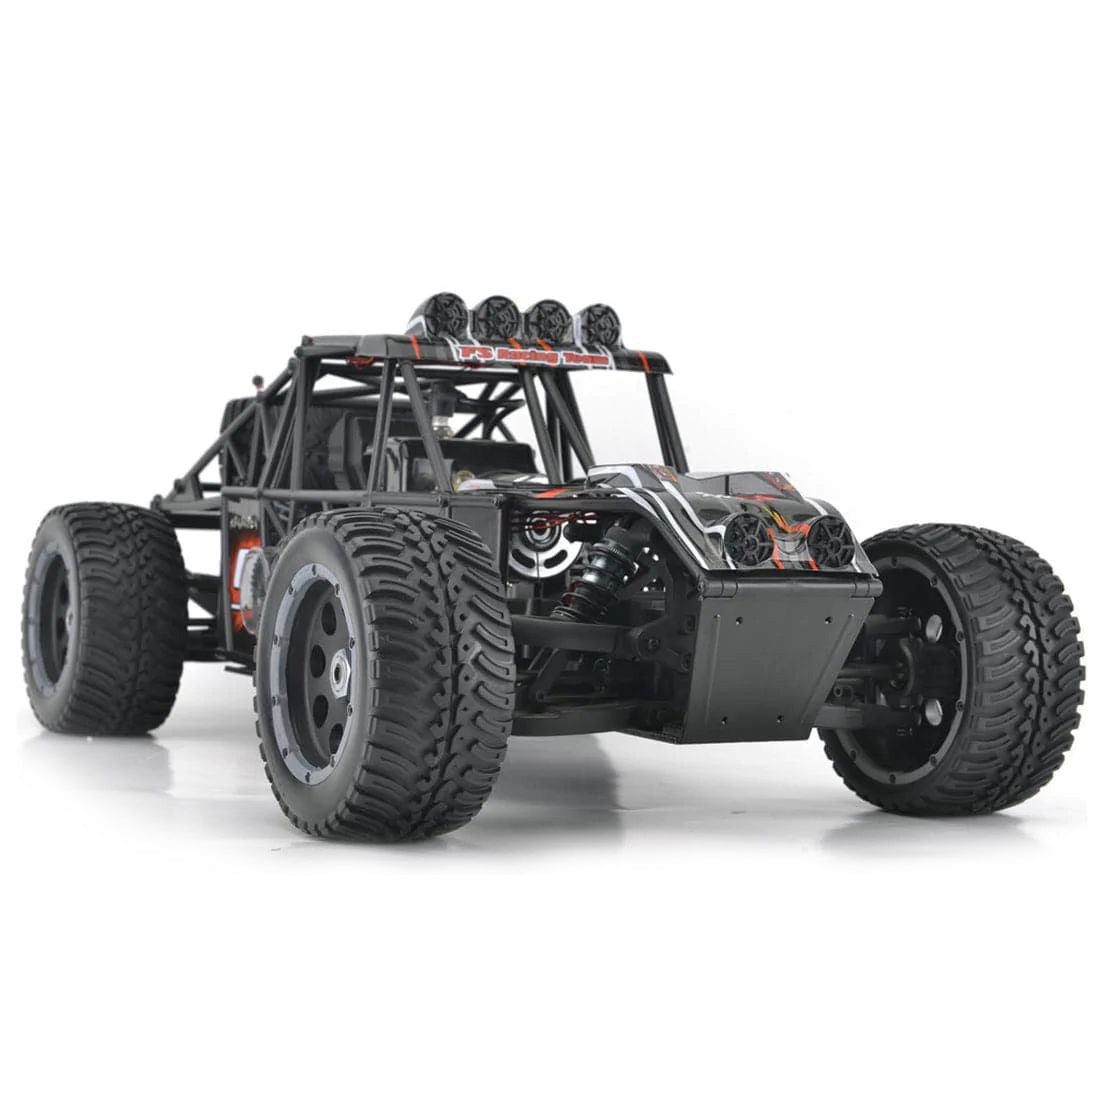 FS Racing 11903 Gasoline RC Car 30CC 1/5 2.4G 4WD High Speed 80KM/H Desert Off-Road Vehicle RTR